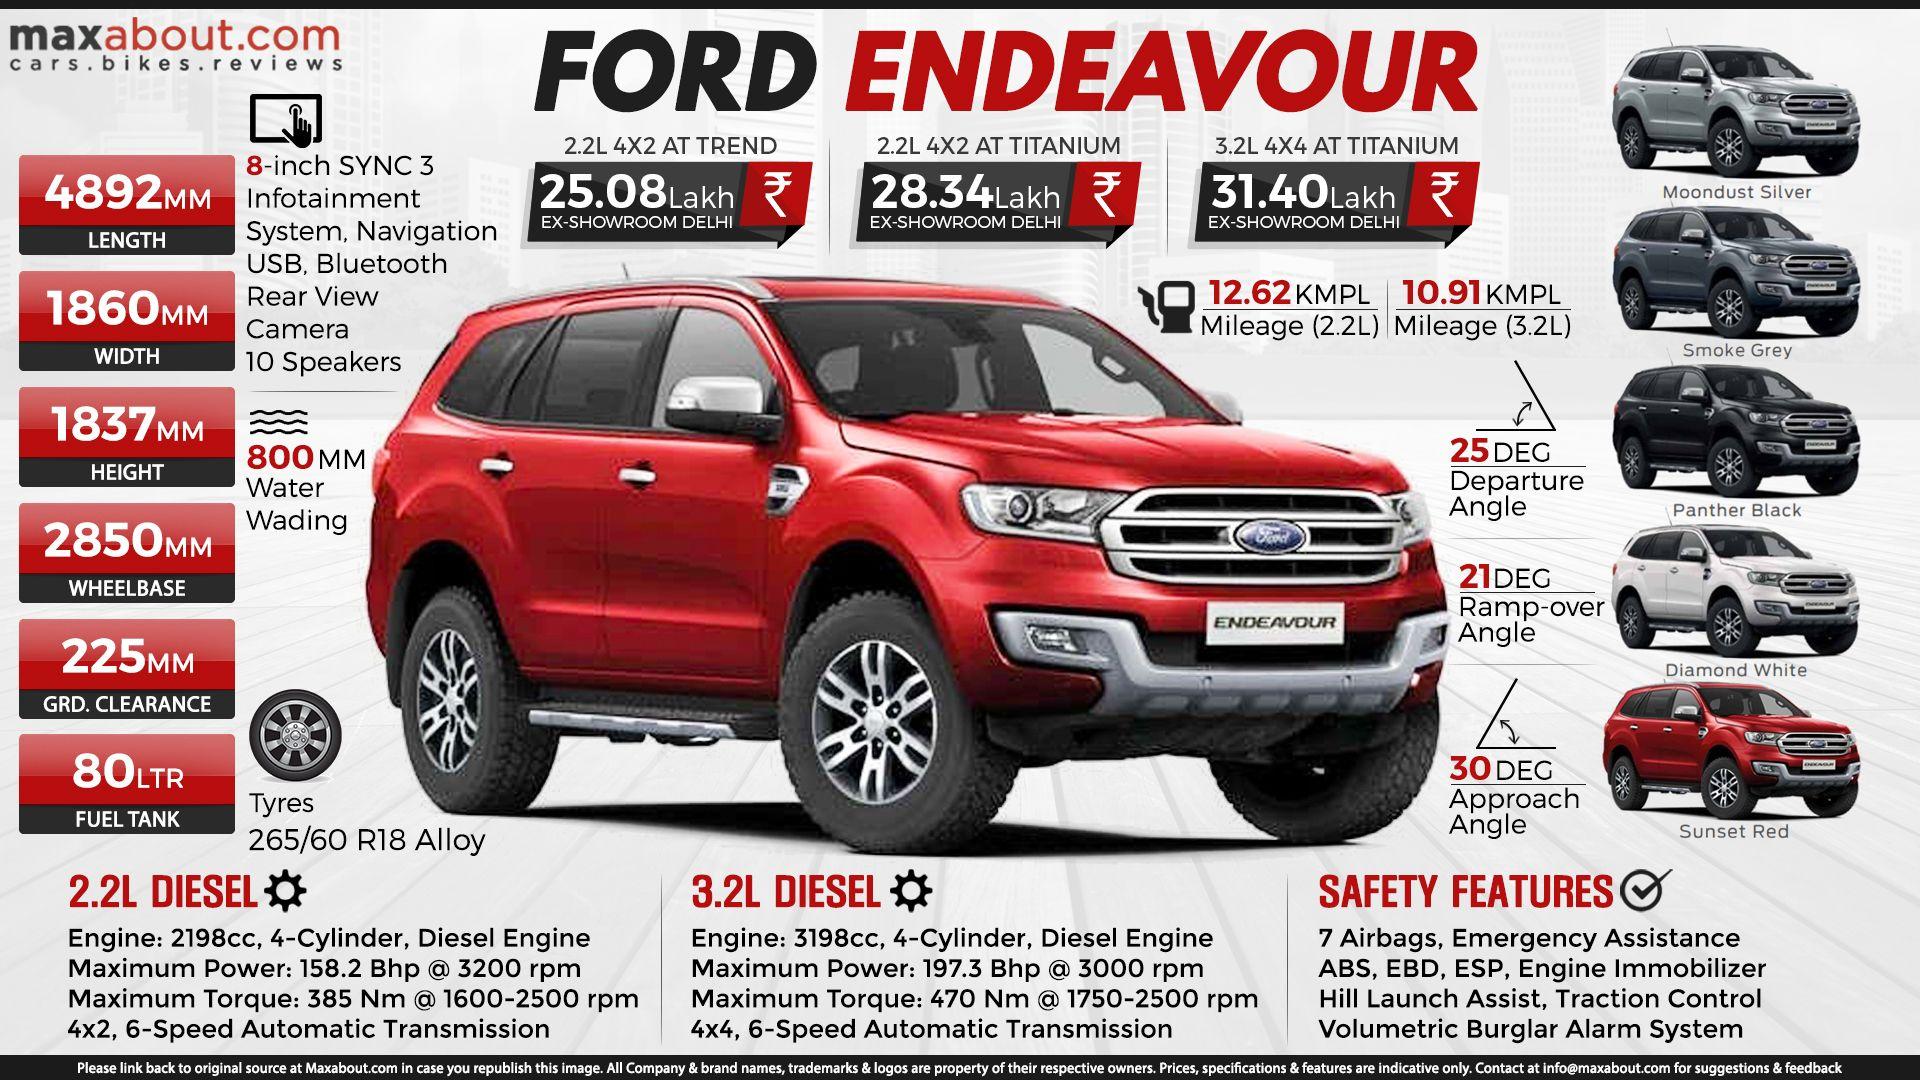 Quick Facts About The All New Ford Endeavour